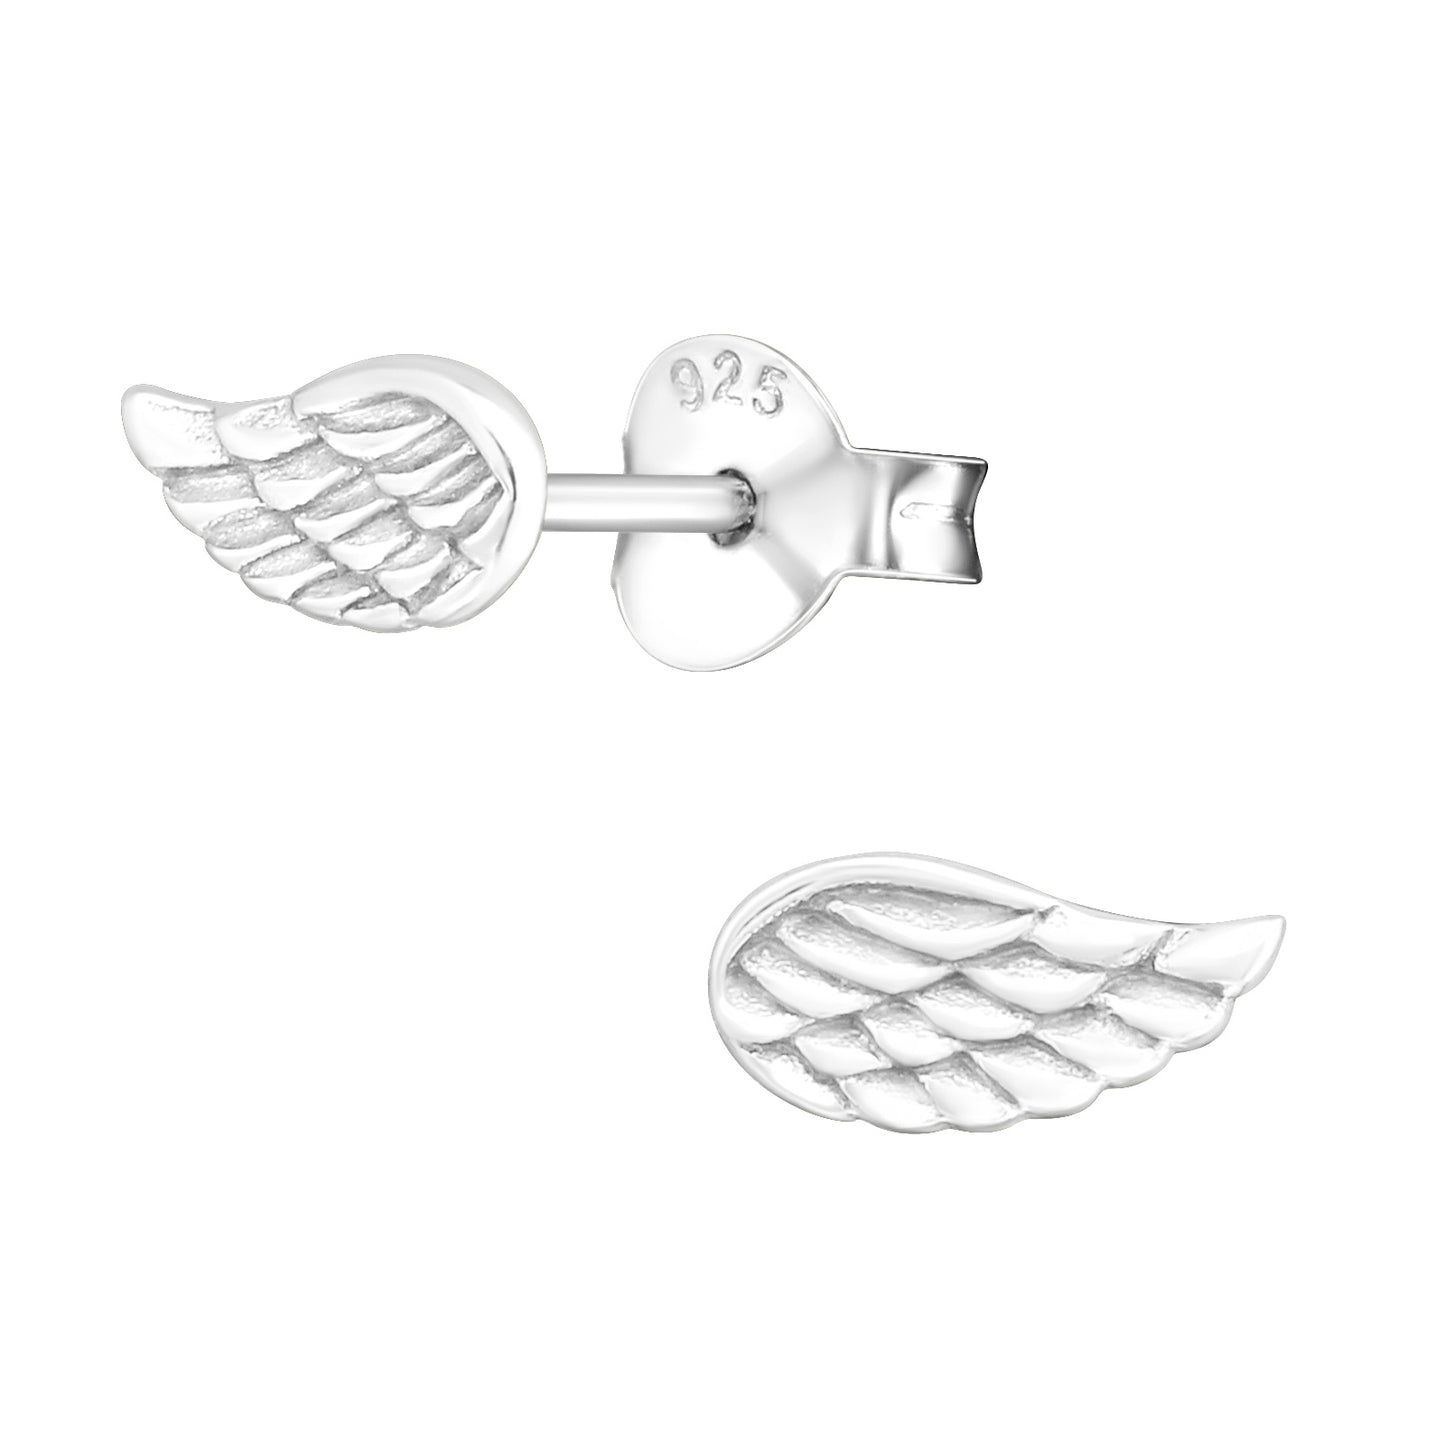 We're loving angels instead with these gorgeous angel wing stud earrings.